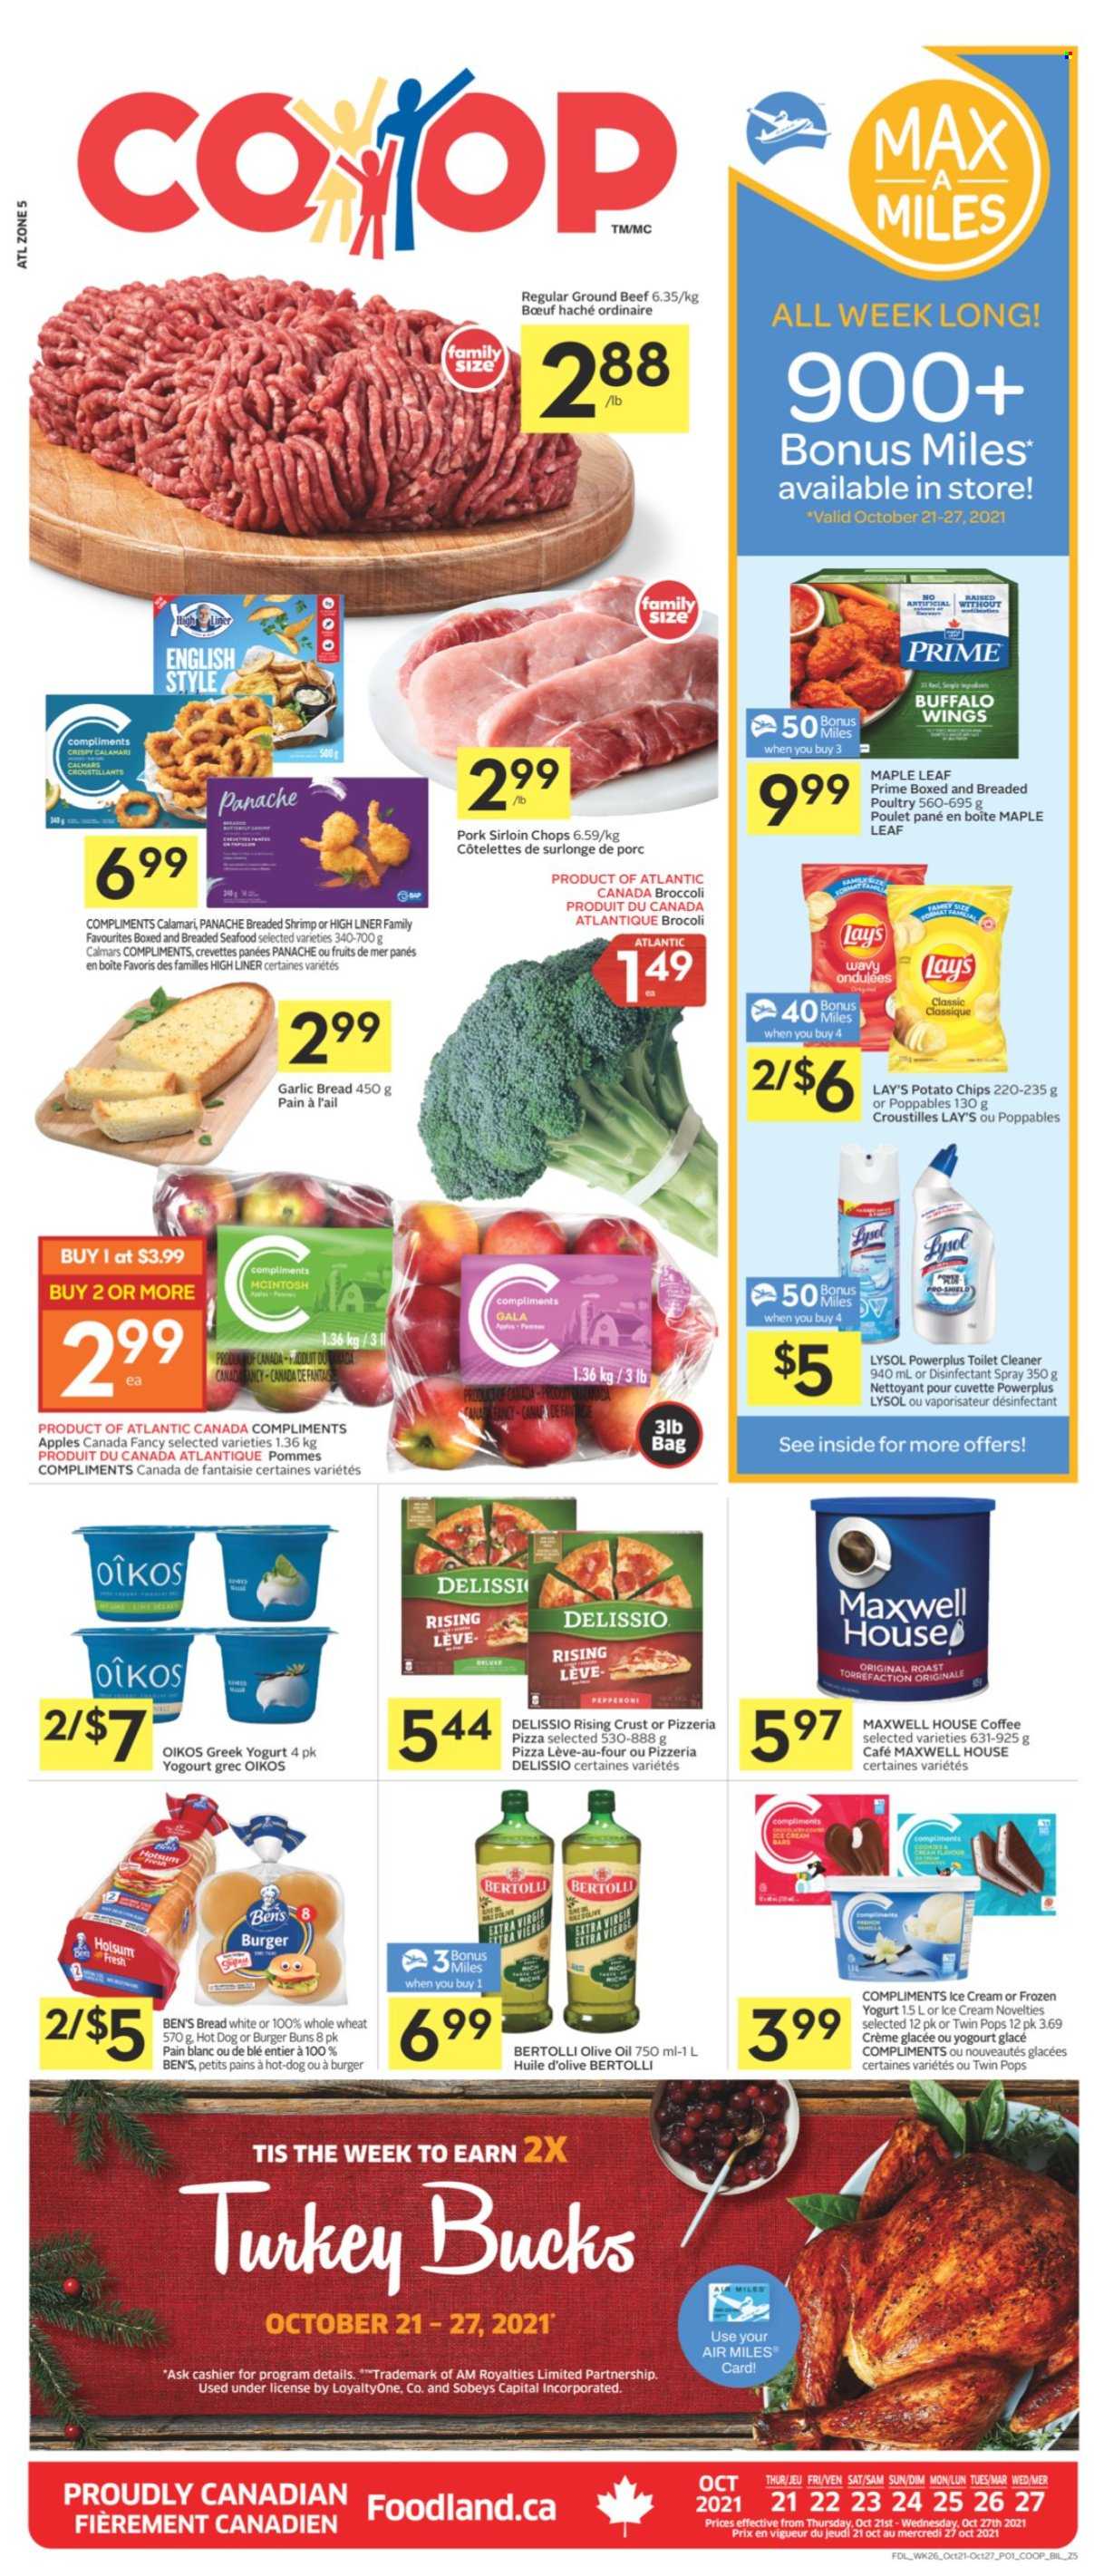 thumbnail - Co-op Flyer - October 21, 2021 - October 27, 2021 - Sales products - bread, buns, burger buns, broccoli, apples, Gala, calamari, seafood, shrimps, hot dog, pizza, Bertolli, pepperoni, greek yoghurt, yoghurt, Oikos, ice cream, potato chips, Lay’s, flour, olive oil, oil, Maxwell House, coffee, L'Or, beef meat, ground beef, pork loin, antibacterial spray, desinfection. Page 1.